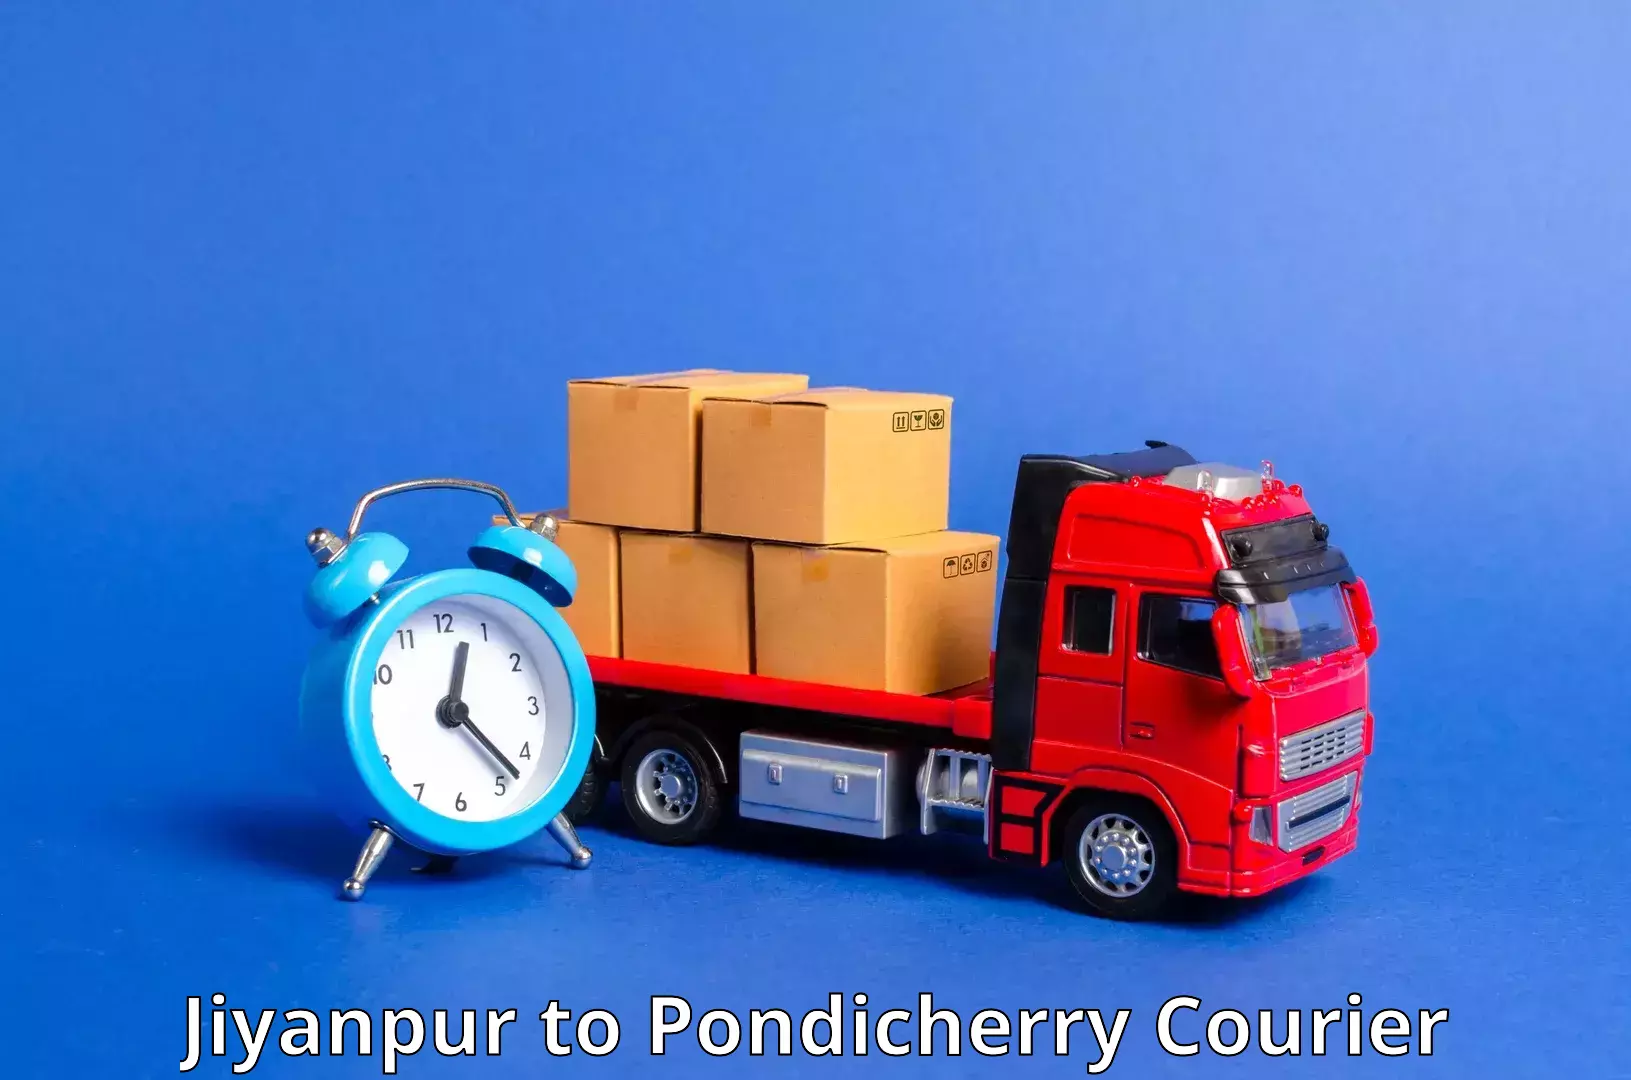 Courier service booking in Jiyanpur to Pondicherry